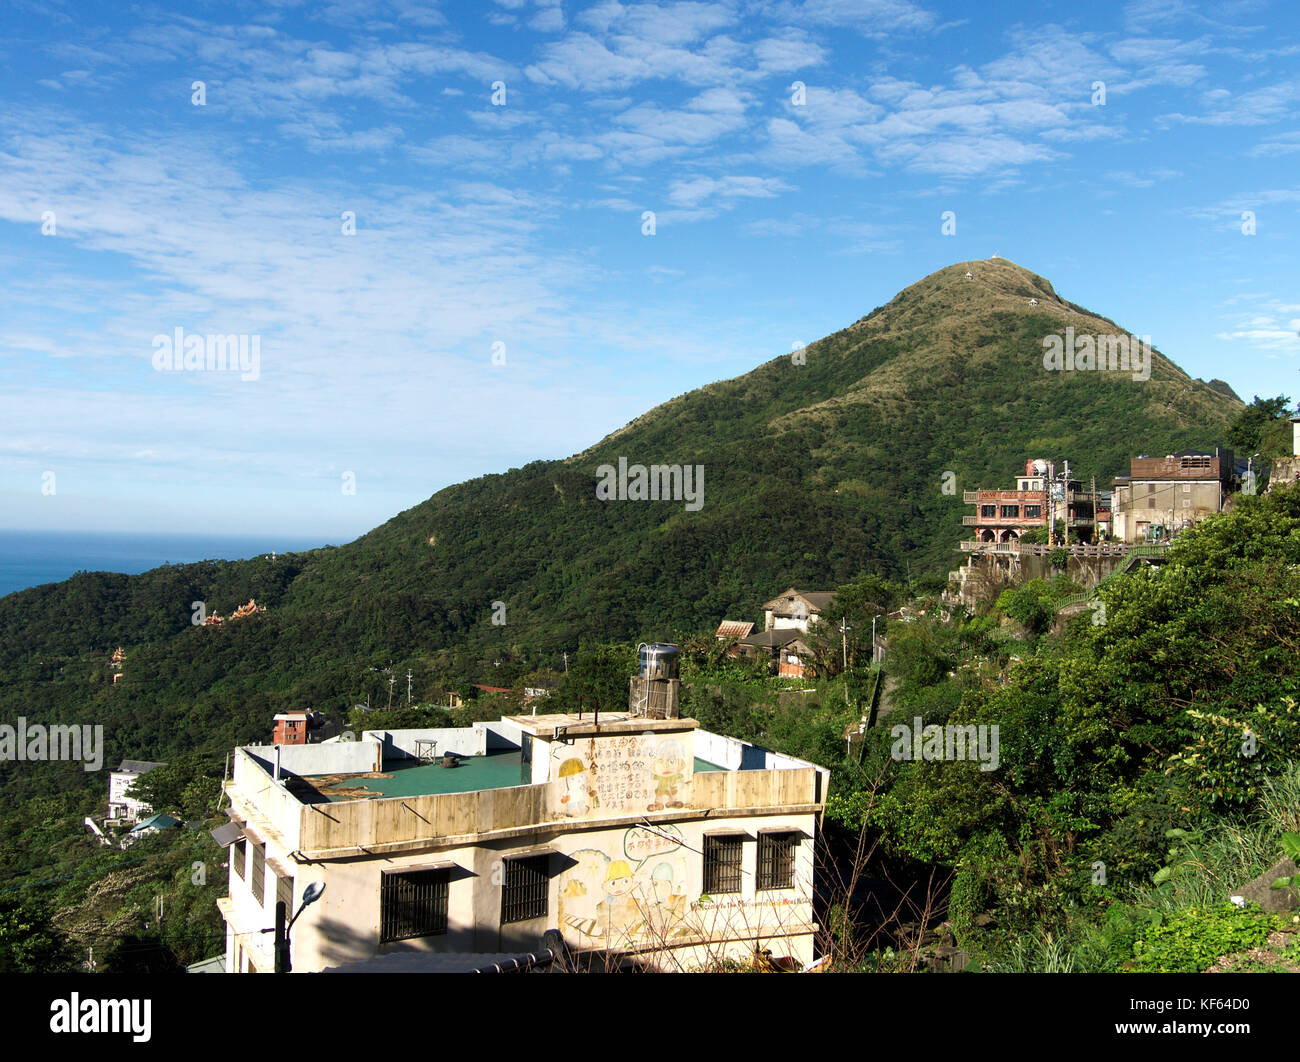 Keelung Mountain Hiking Trail with Residential Apartment blocks at the foot of the hill and view of the sea, Jiufen, Ruifang District, Taiwan Stock Photo